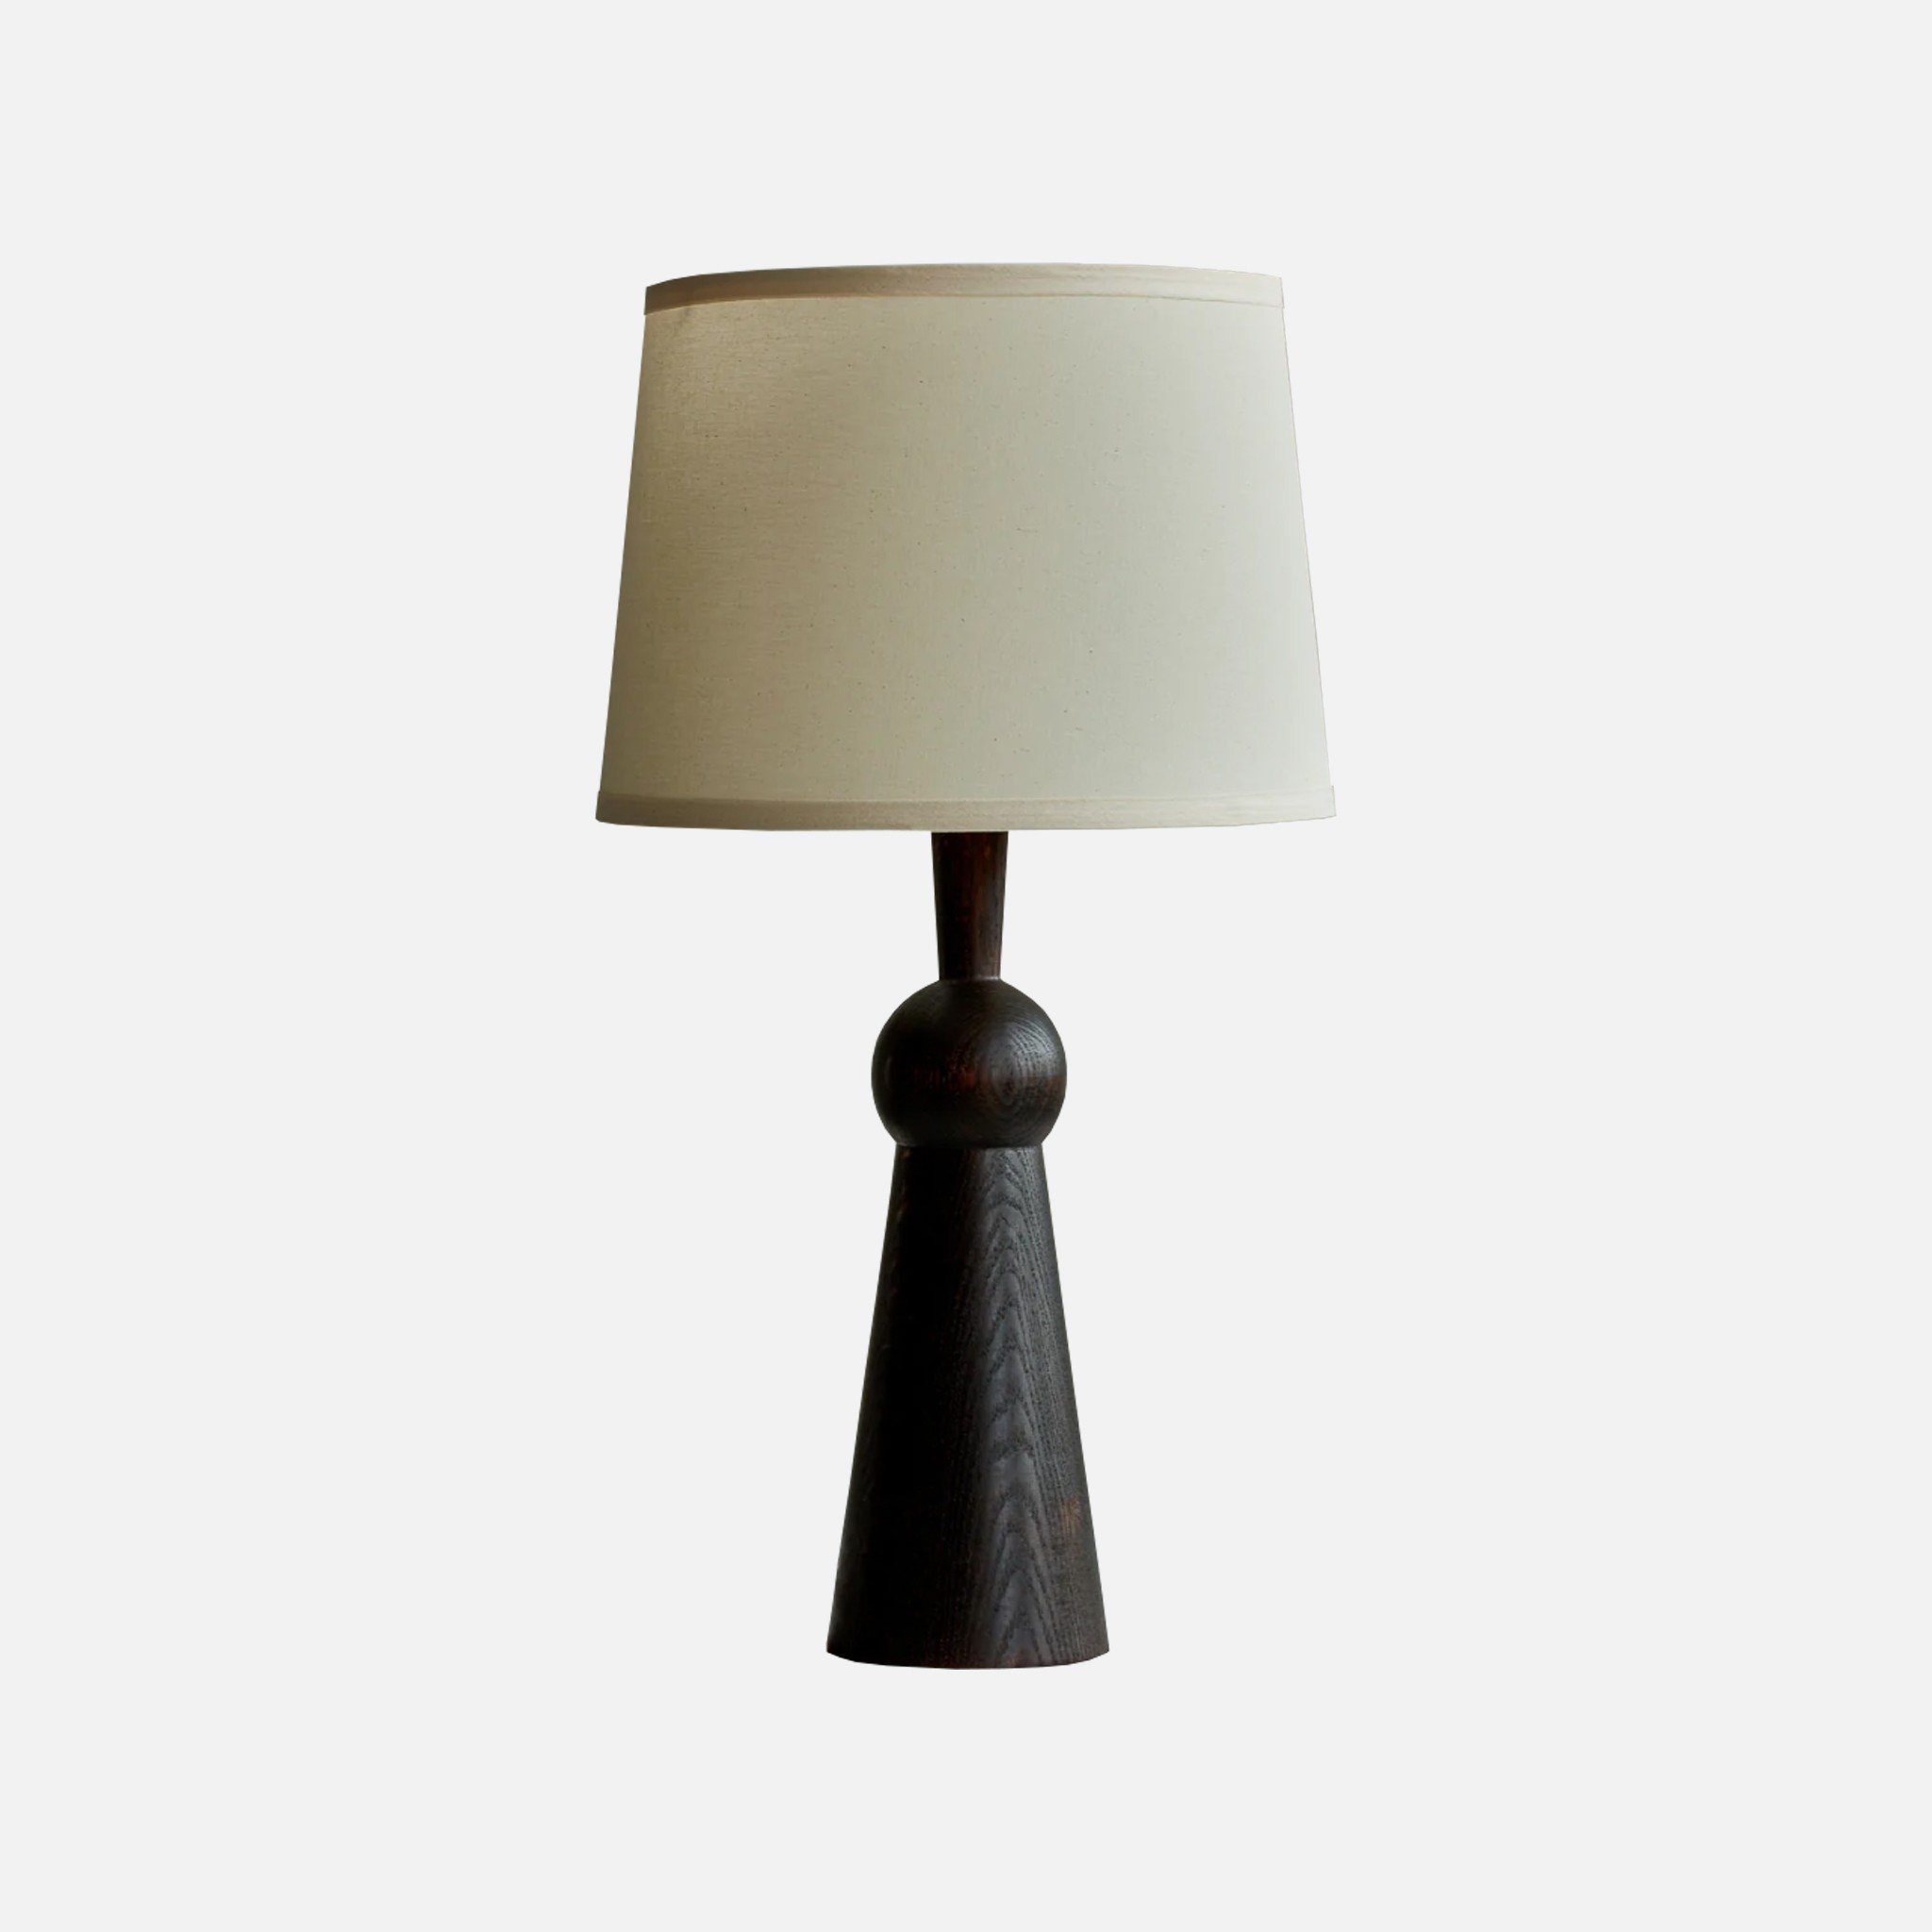 a table lamp with a white shade on it